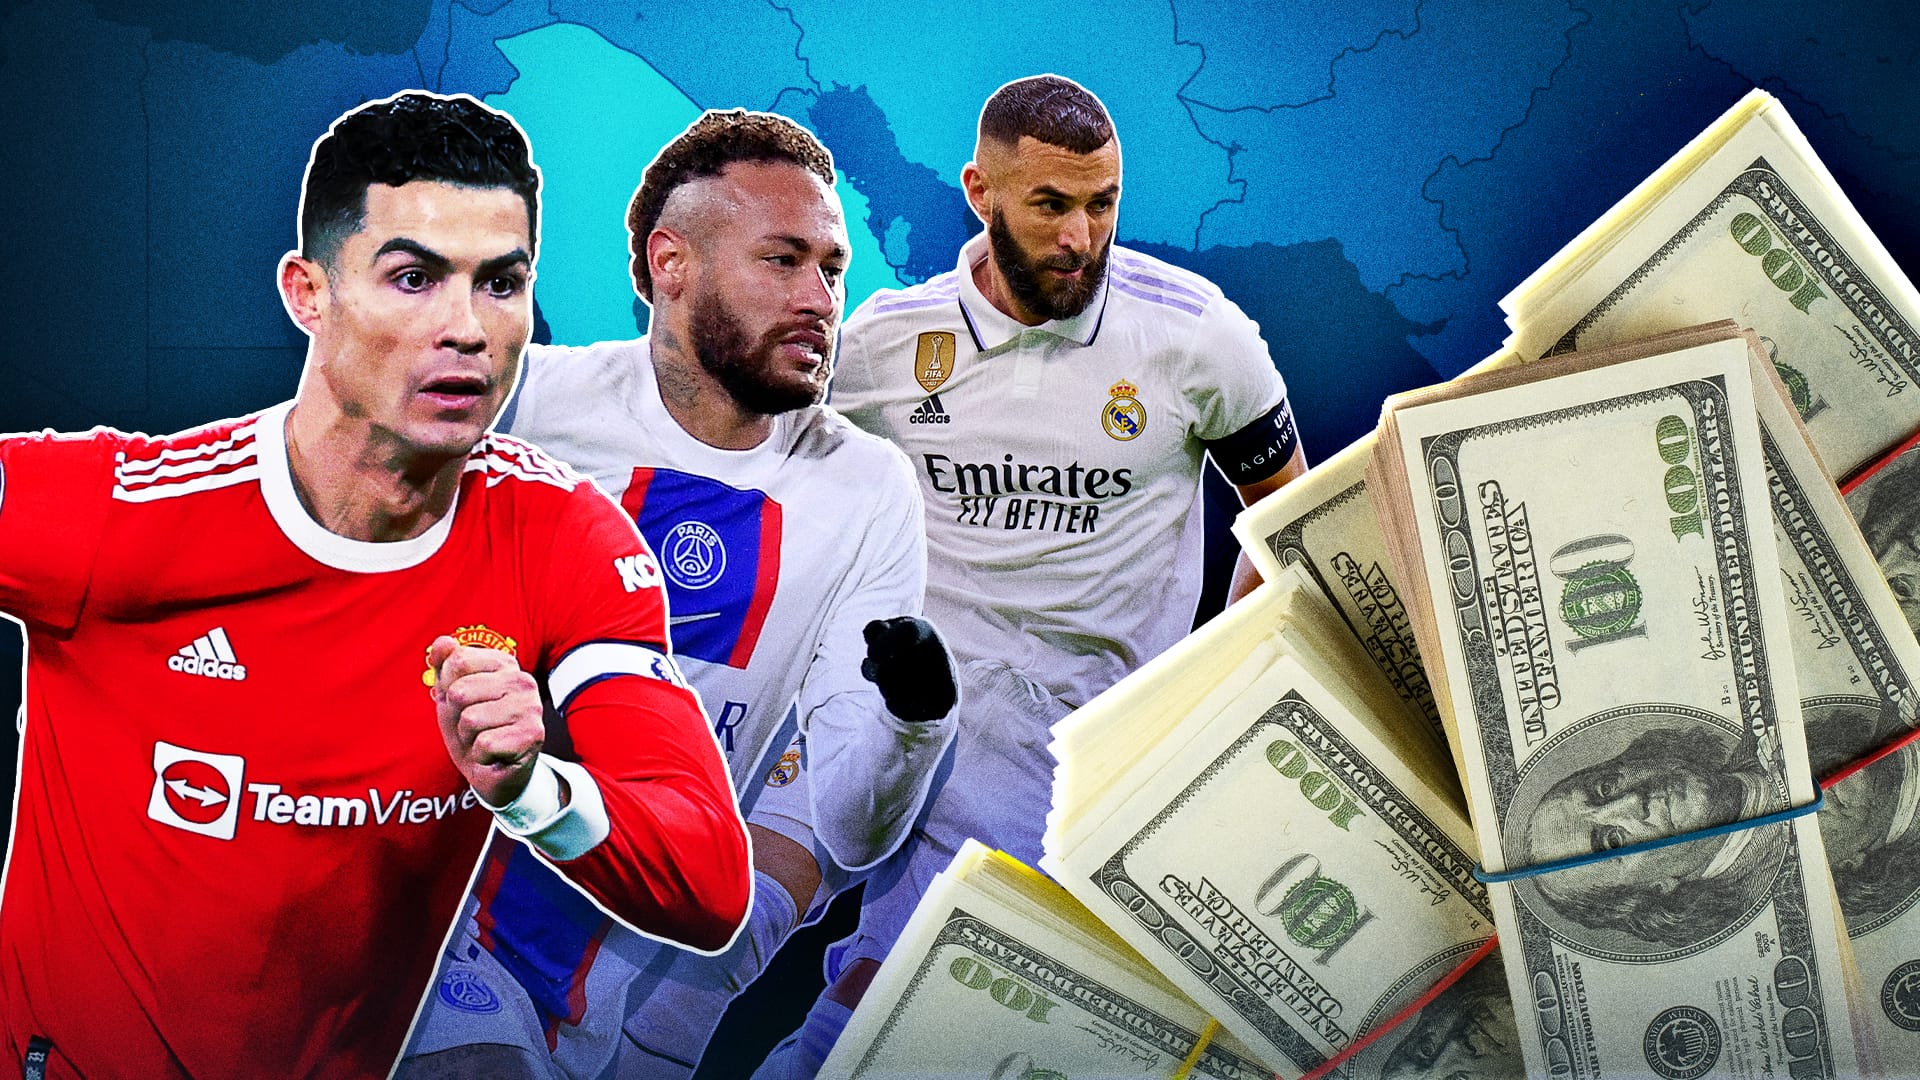 Why Saudi Arabia is pumping billions of dollars into pro soccer